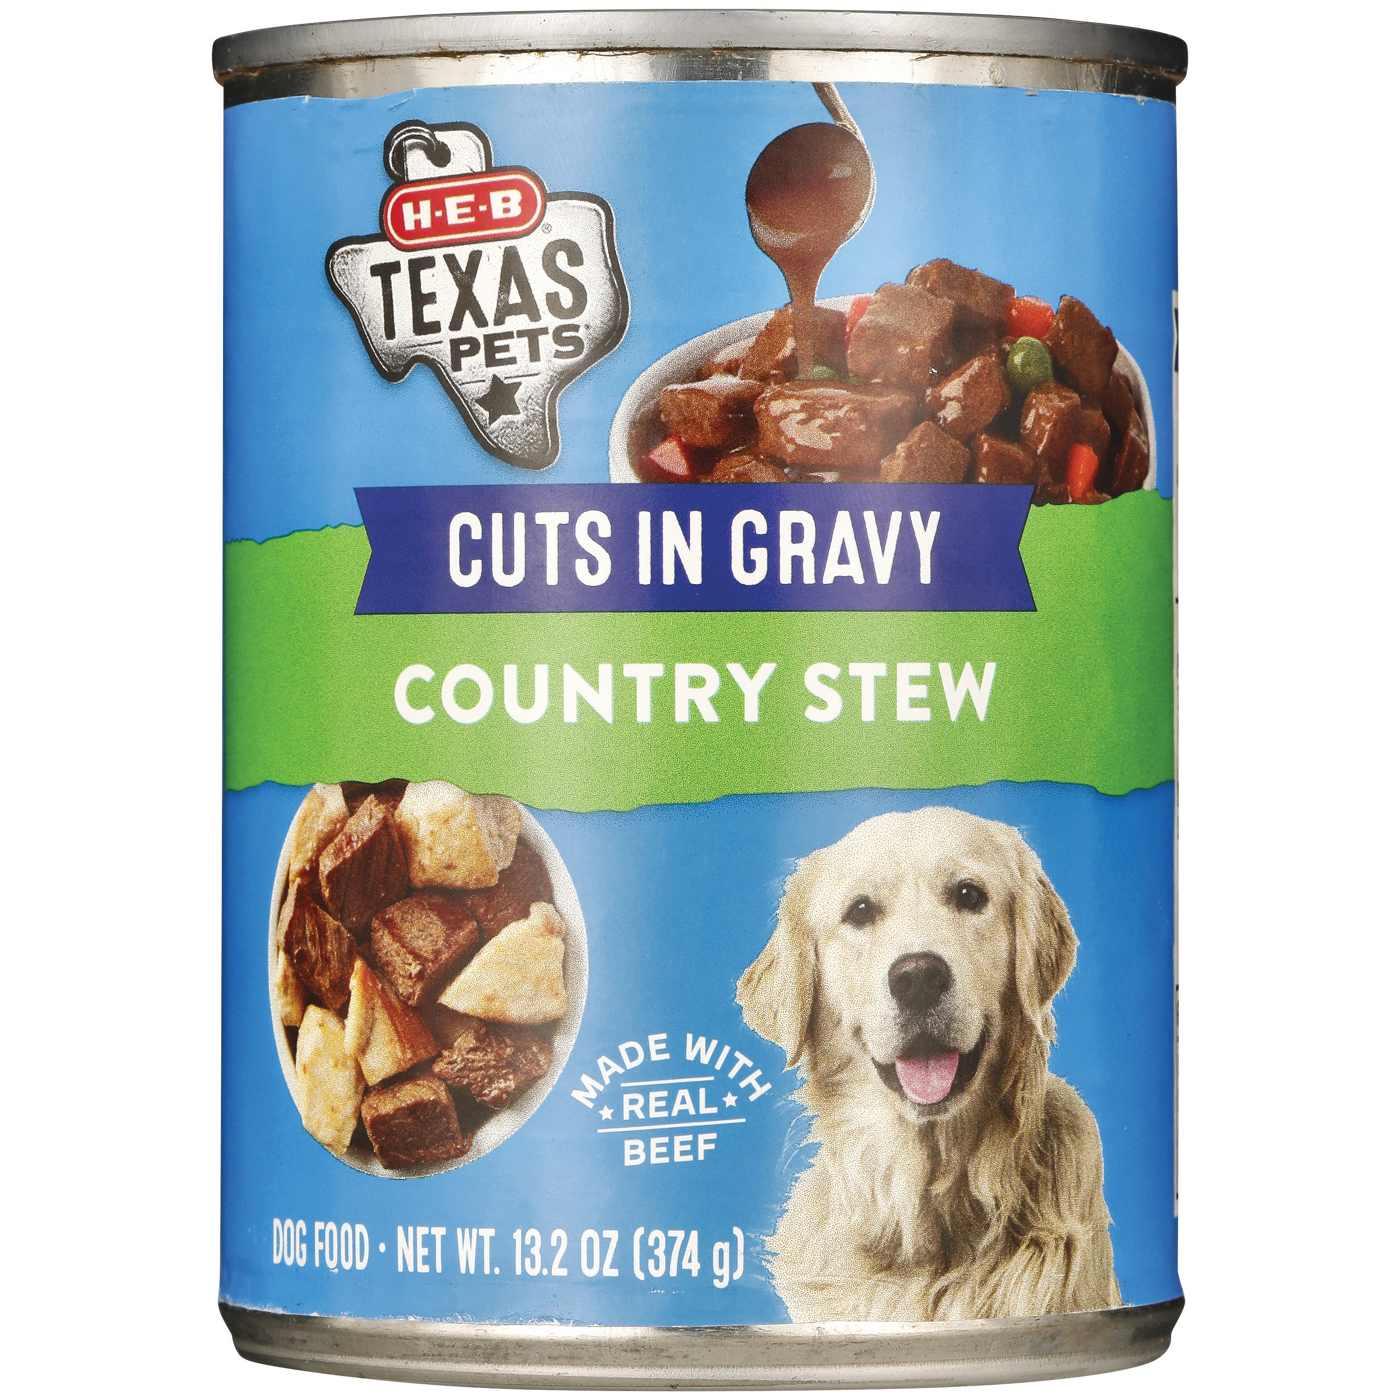 H-E-B Texas Pets Country Stew Wet Dog Food; image 1 of 2